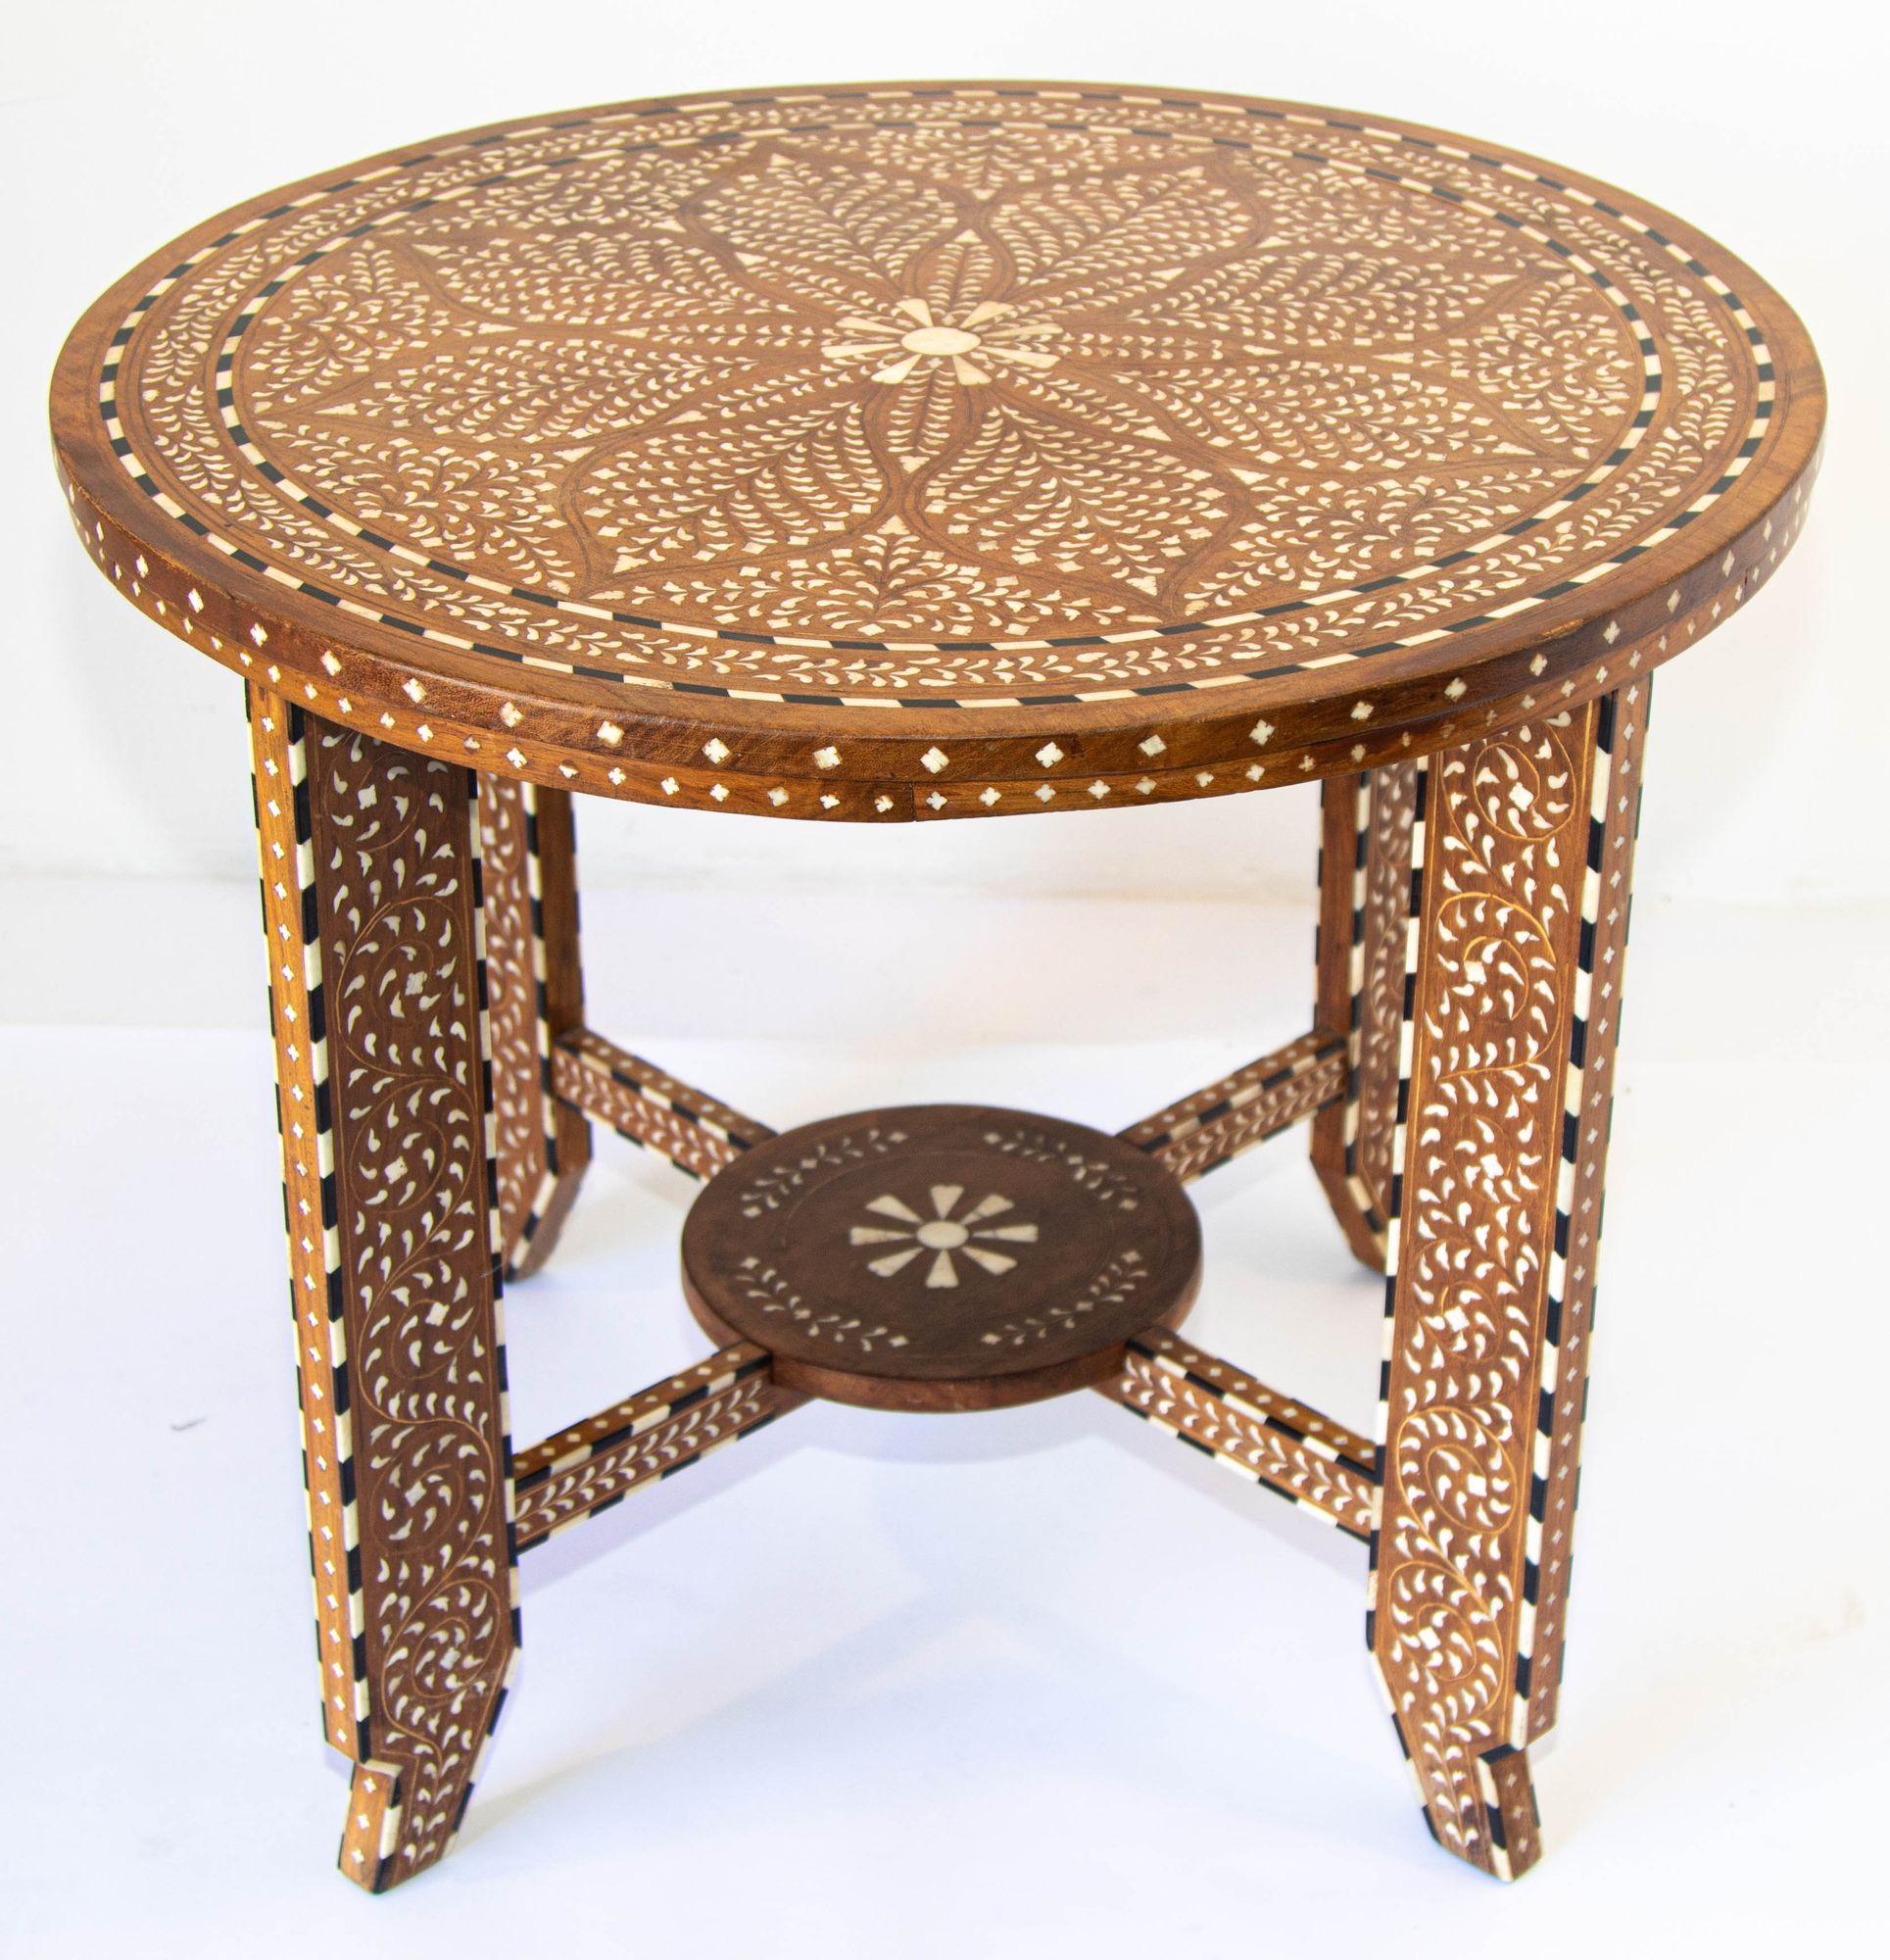 Anglo Indian Mughal Teak Wood Round Side Table with Bone Inlaid For Sale 10